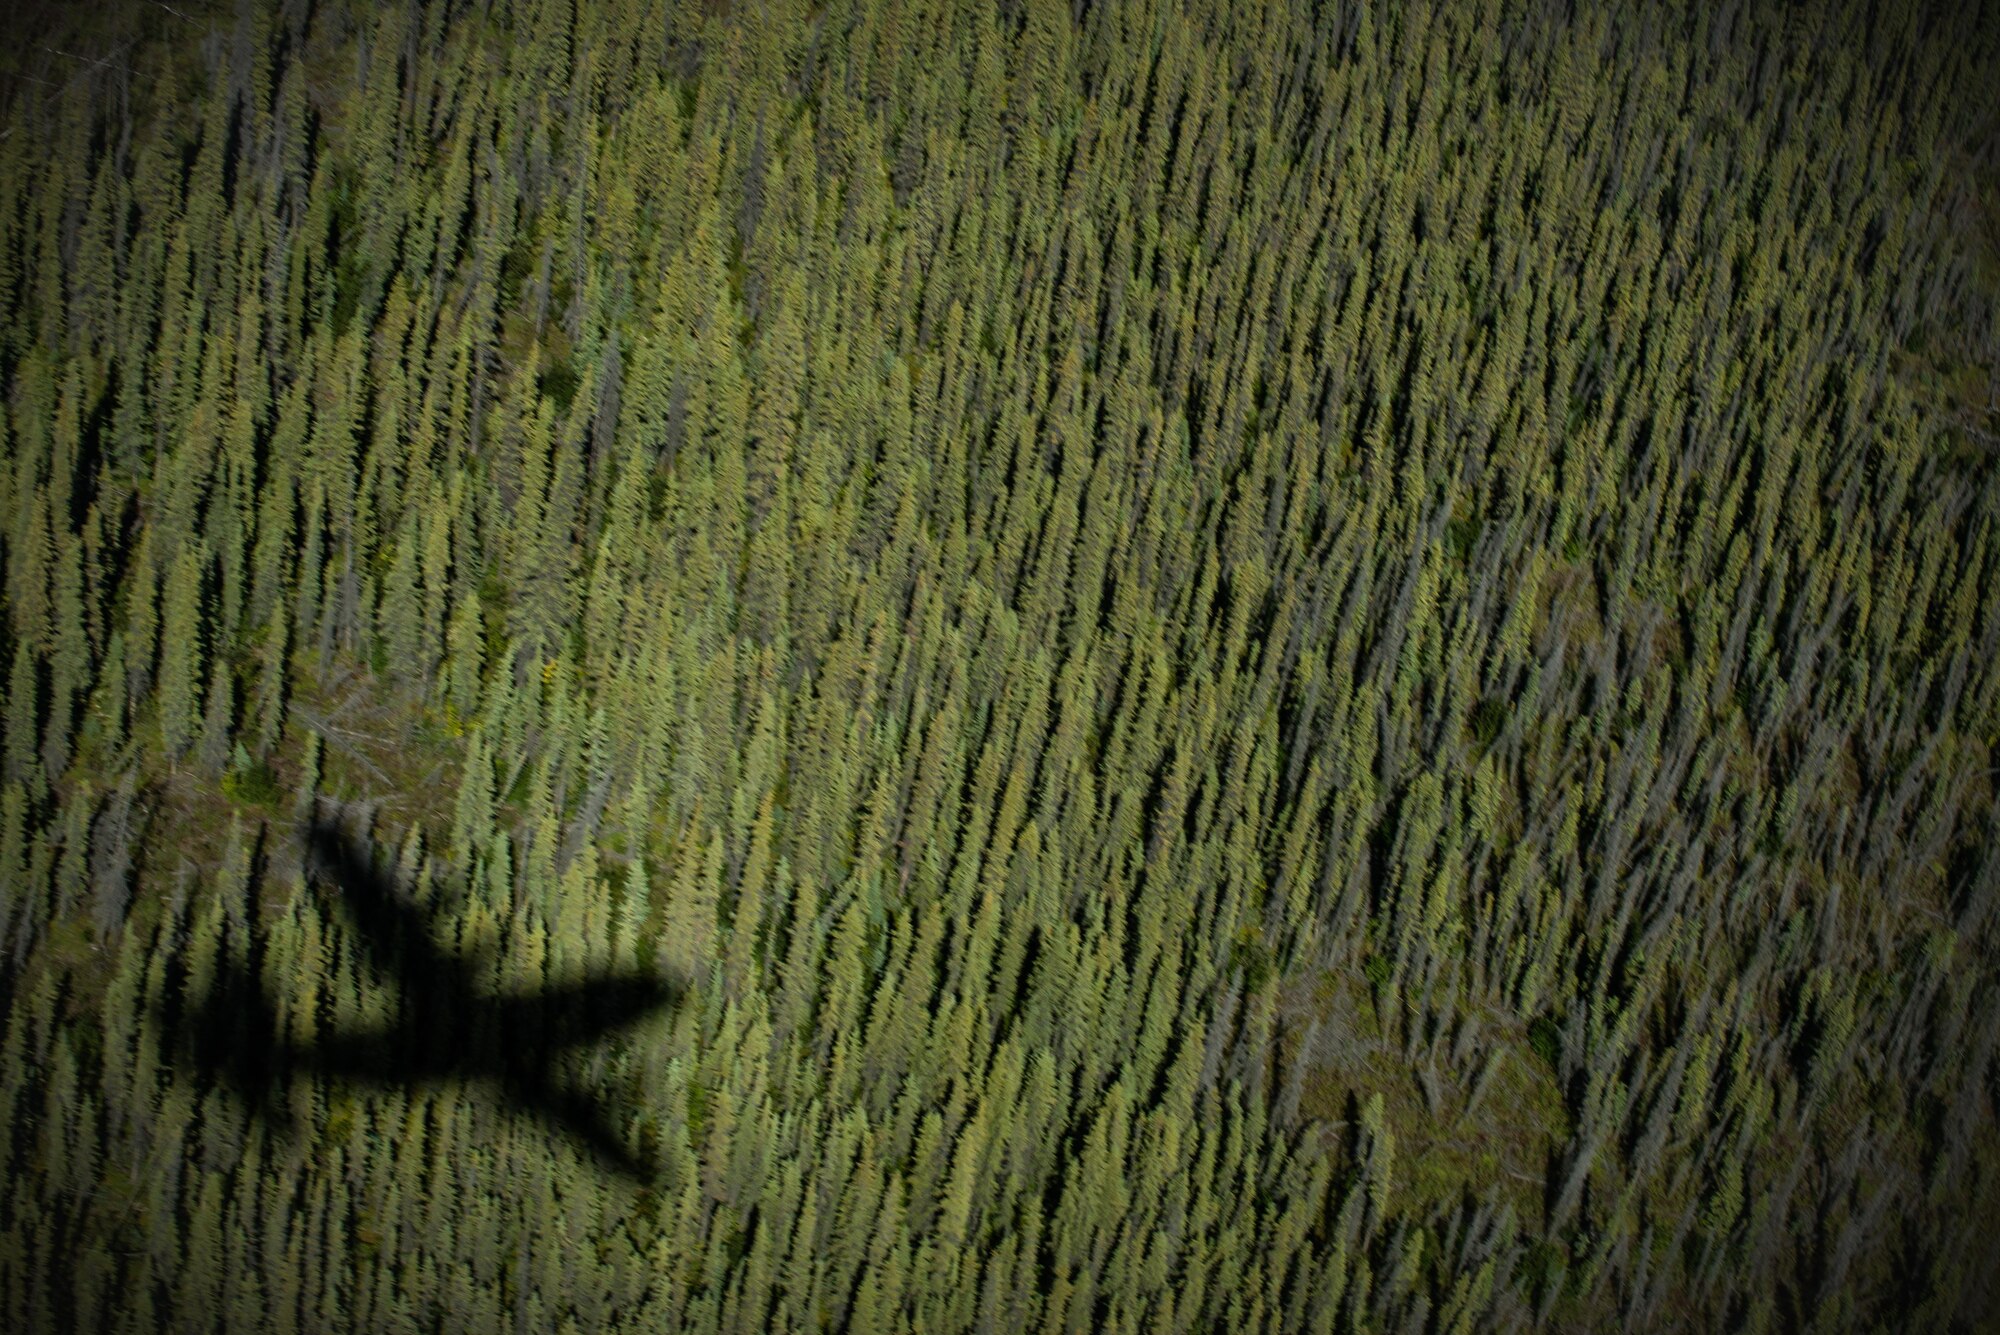 A shadow of a C-130 Hercules is casted onto the ground while performing low-levels during Red Flag Alaska near Joint Base Elmendorf-Richardson, Alaska, Aug. 12, 2016. Red Flag provides joint offensive counter-air, interdiction, close air support, and large force employment training in a simulated combat environment. (U.S. Air Force photo by Staff Sgt. Michael Smith/Released)